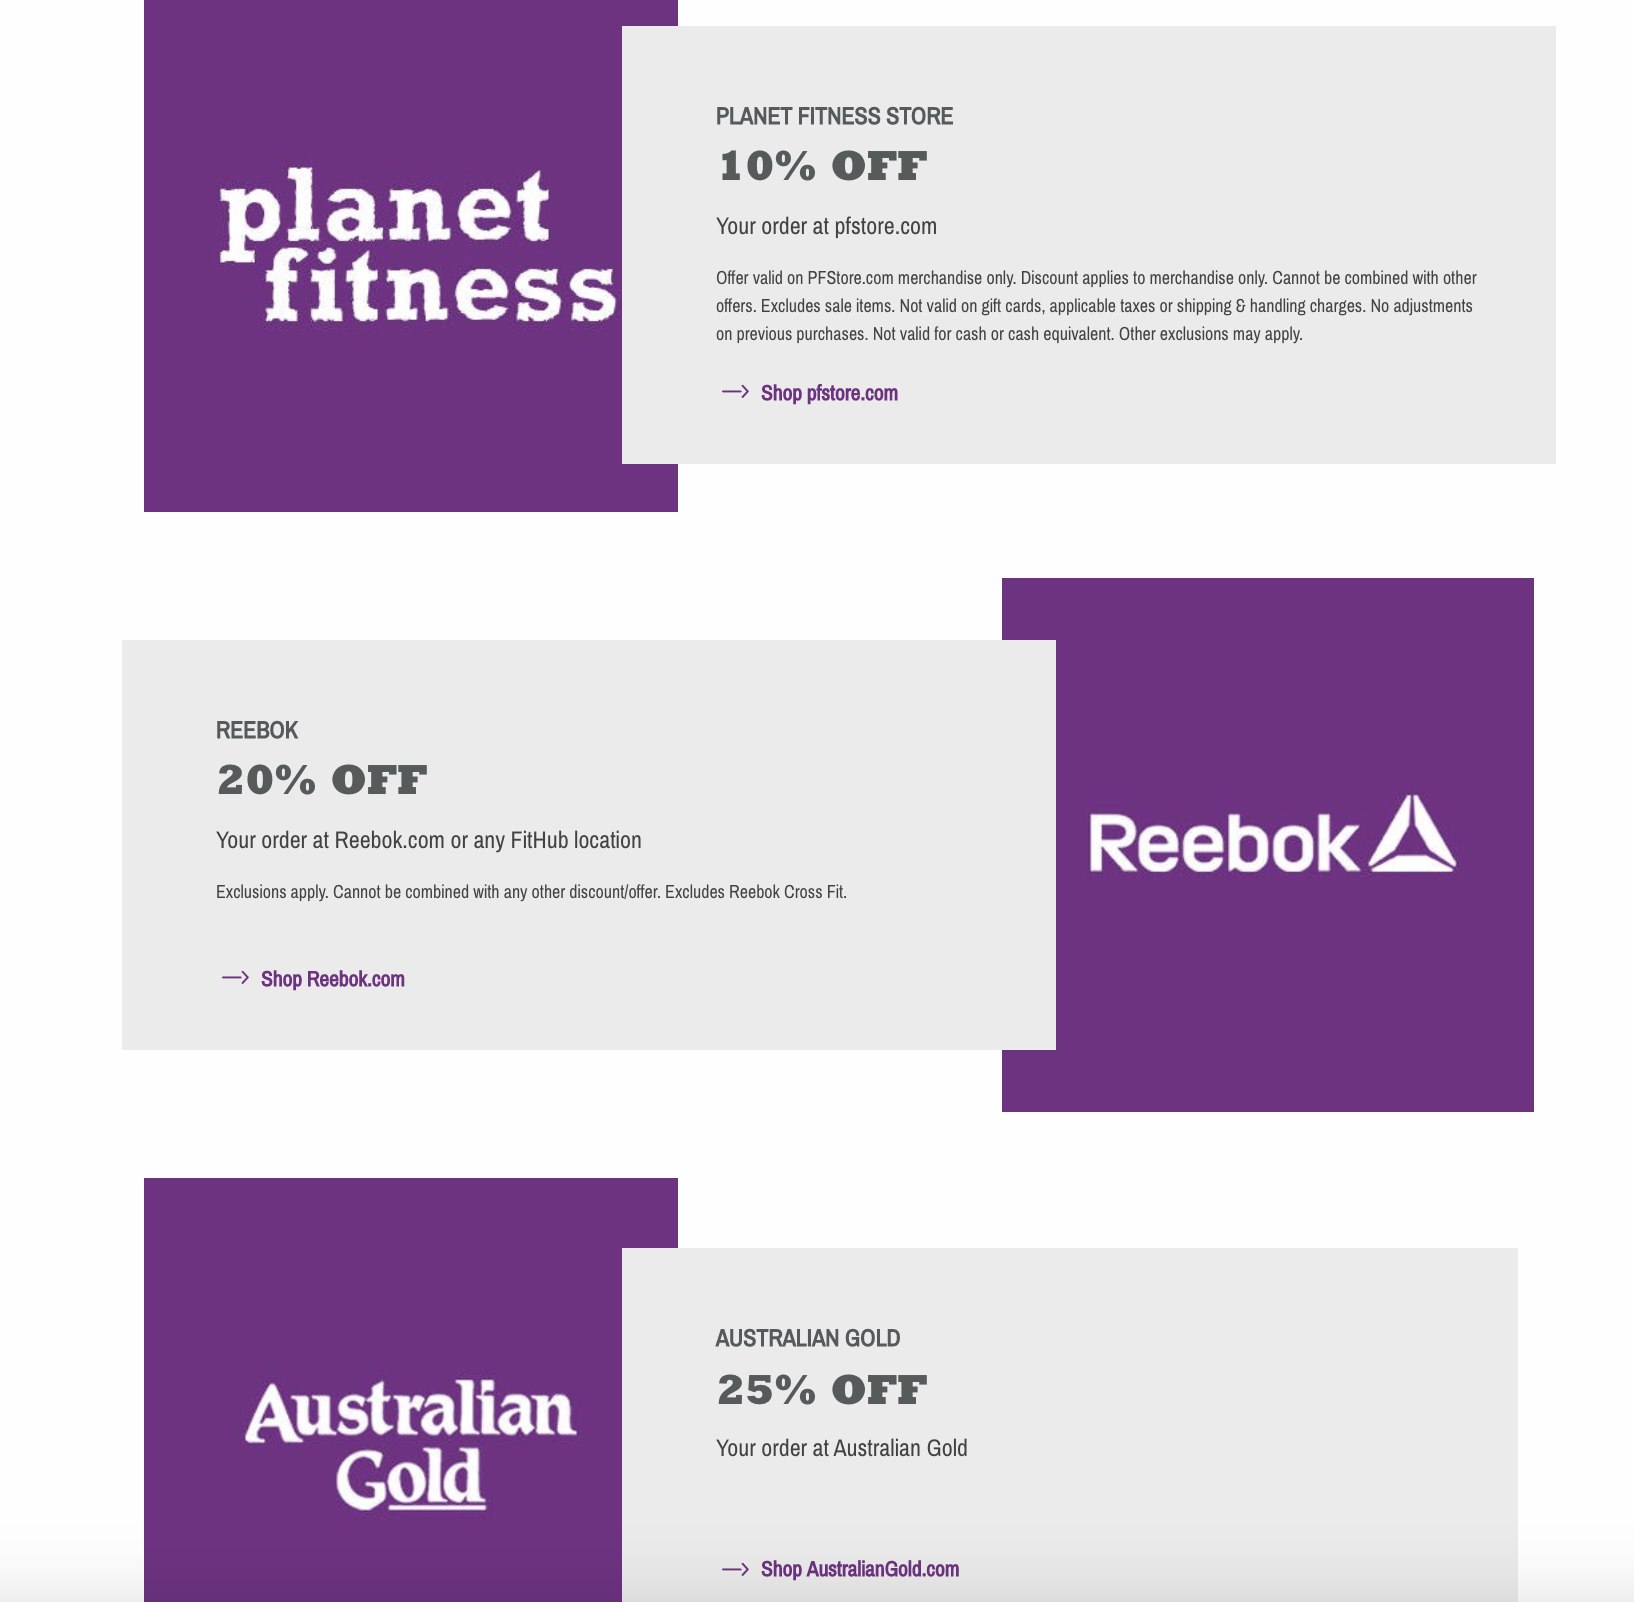 reebok and planet fitness